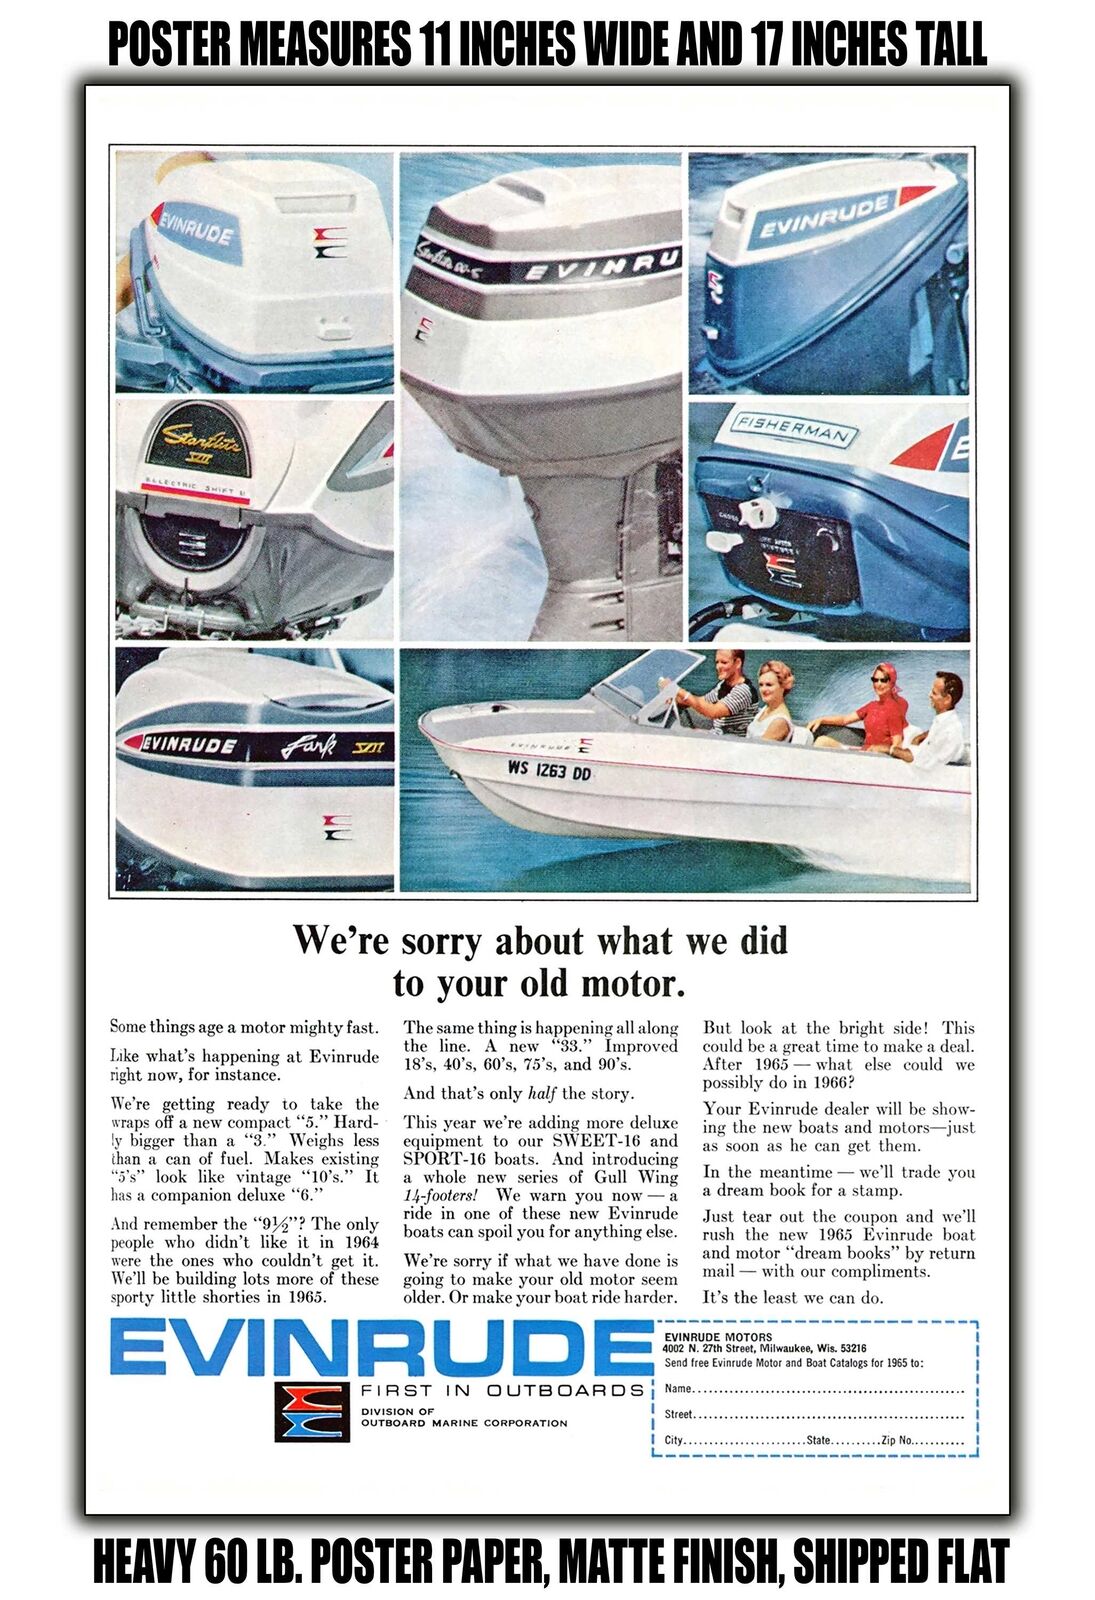 11x17 POSTER - 1964 Were Sorry About What We Did to Your Old Motor Evinrude